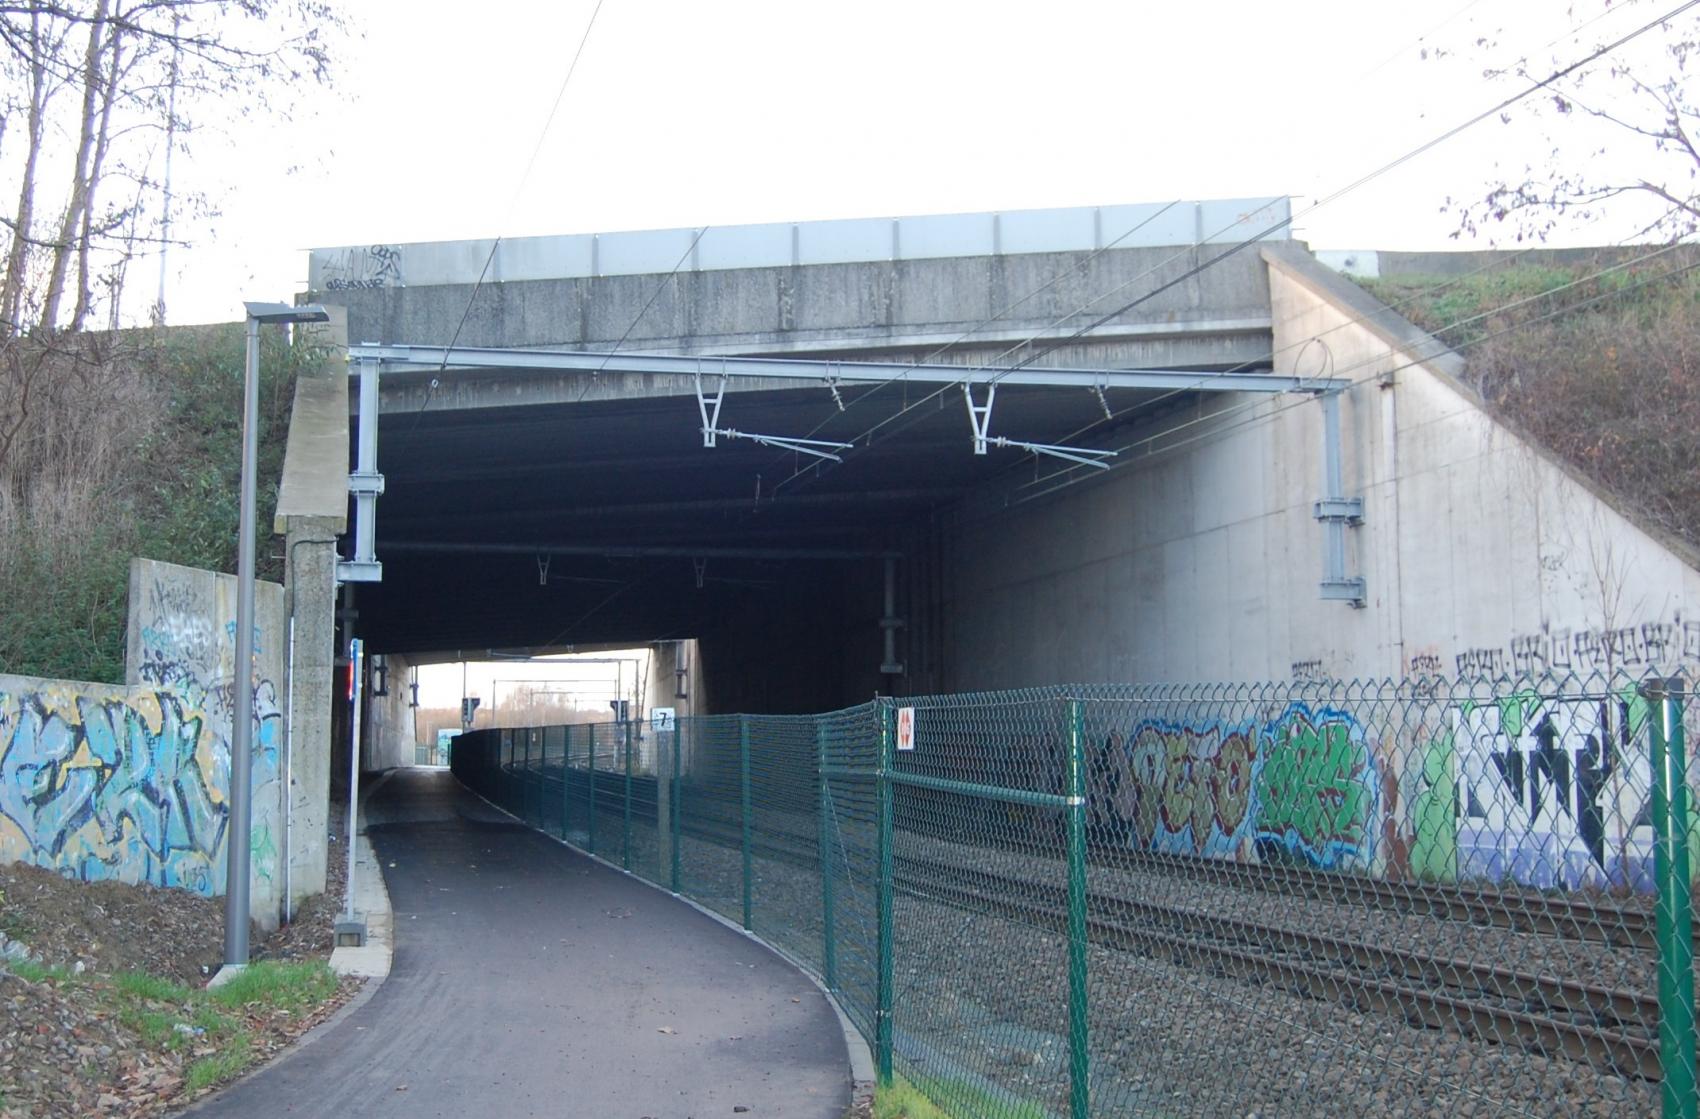 Steel beams holding the overhead train lines on either side of the tunnel ensure an obstacle-free passage for cyclists.